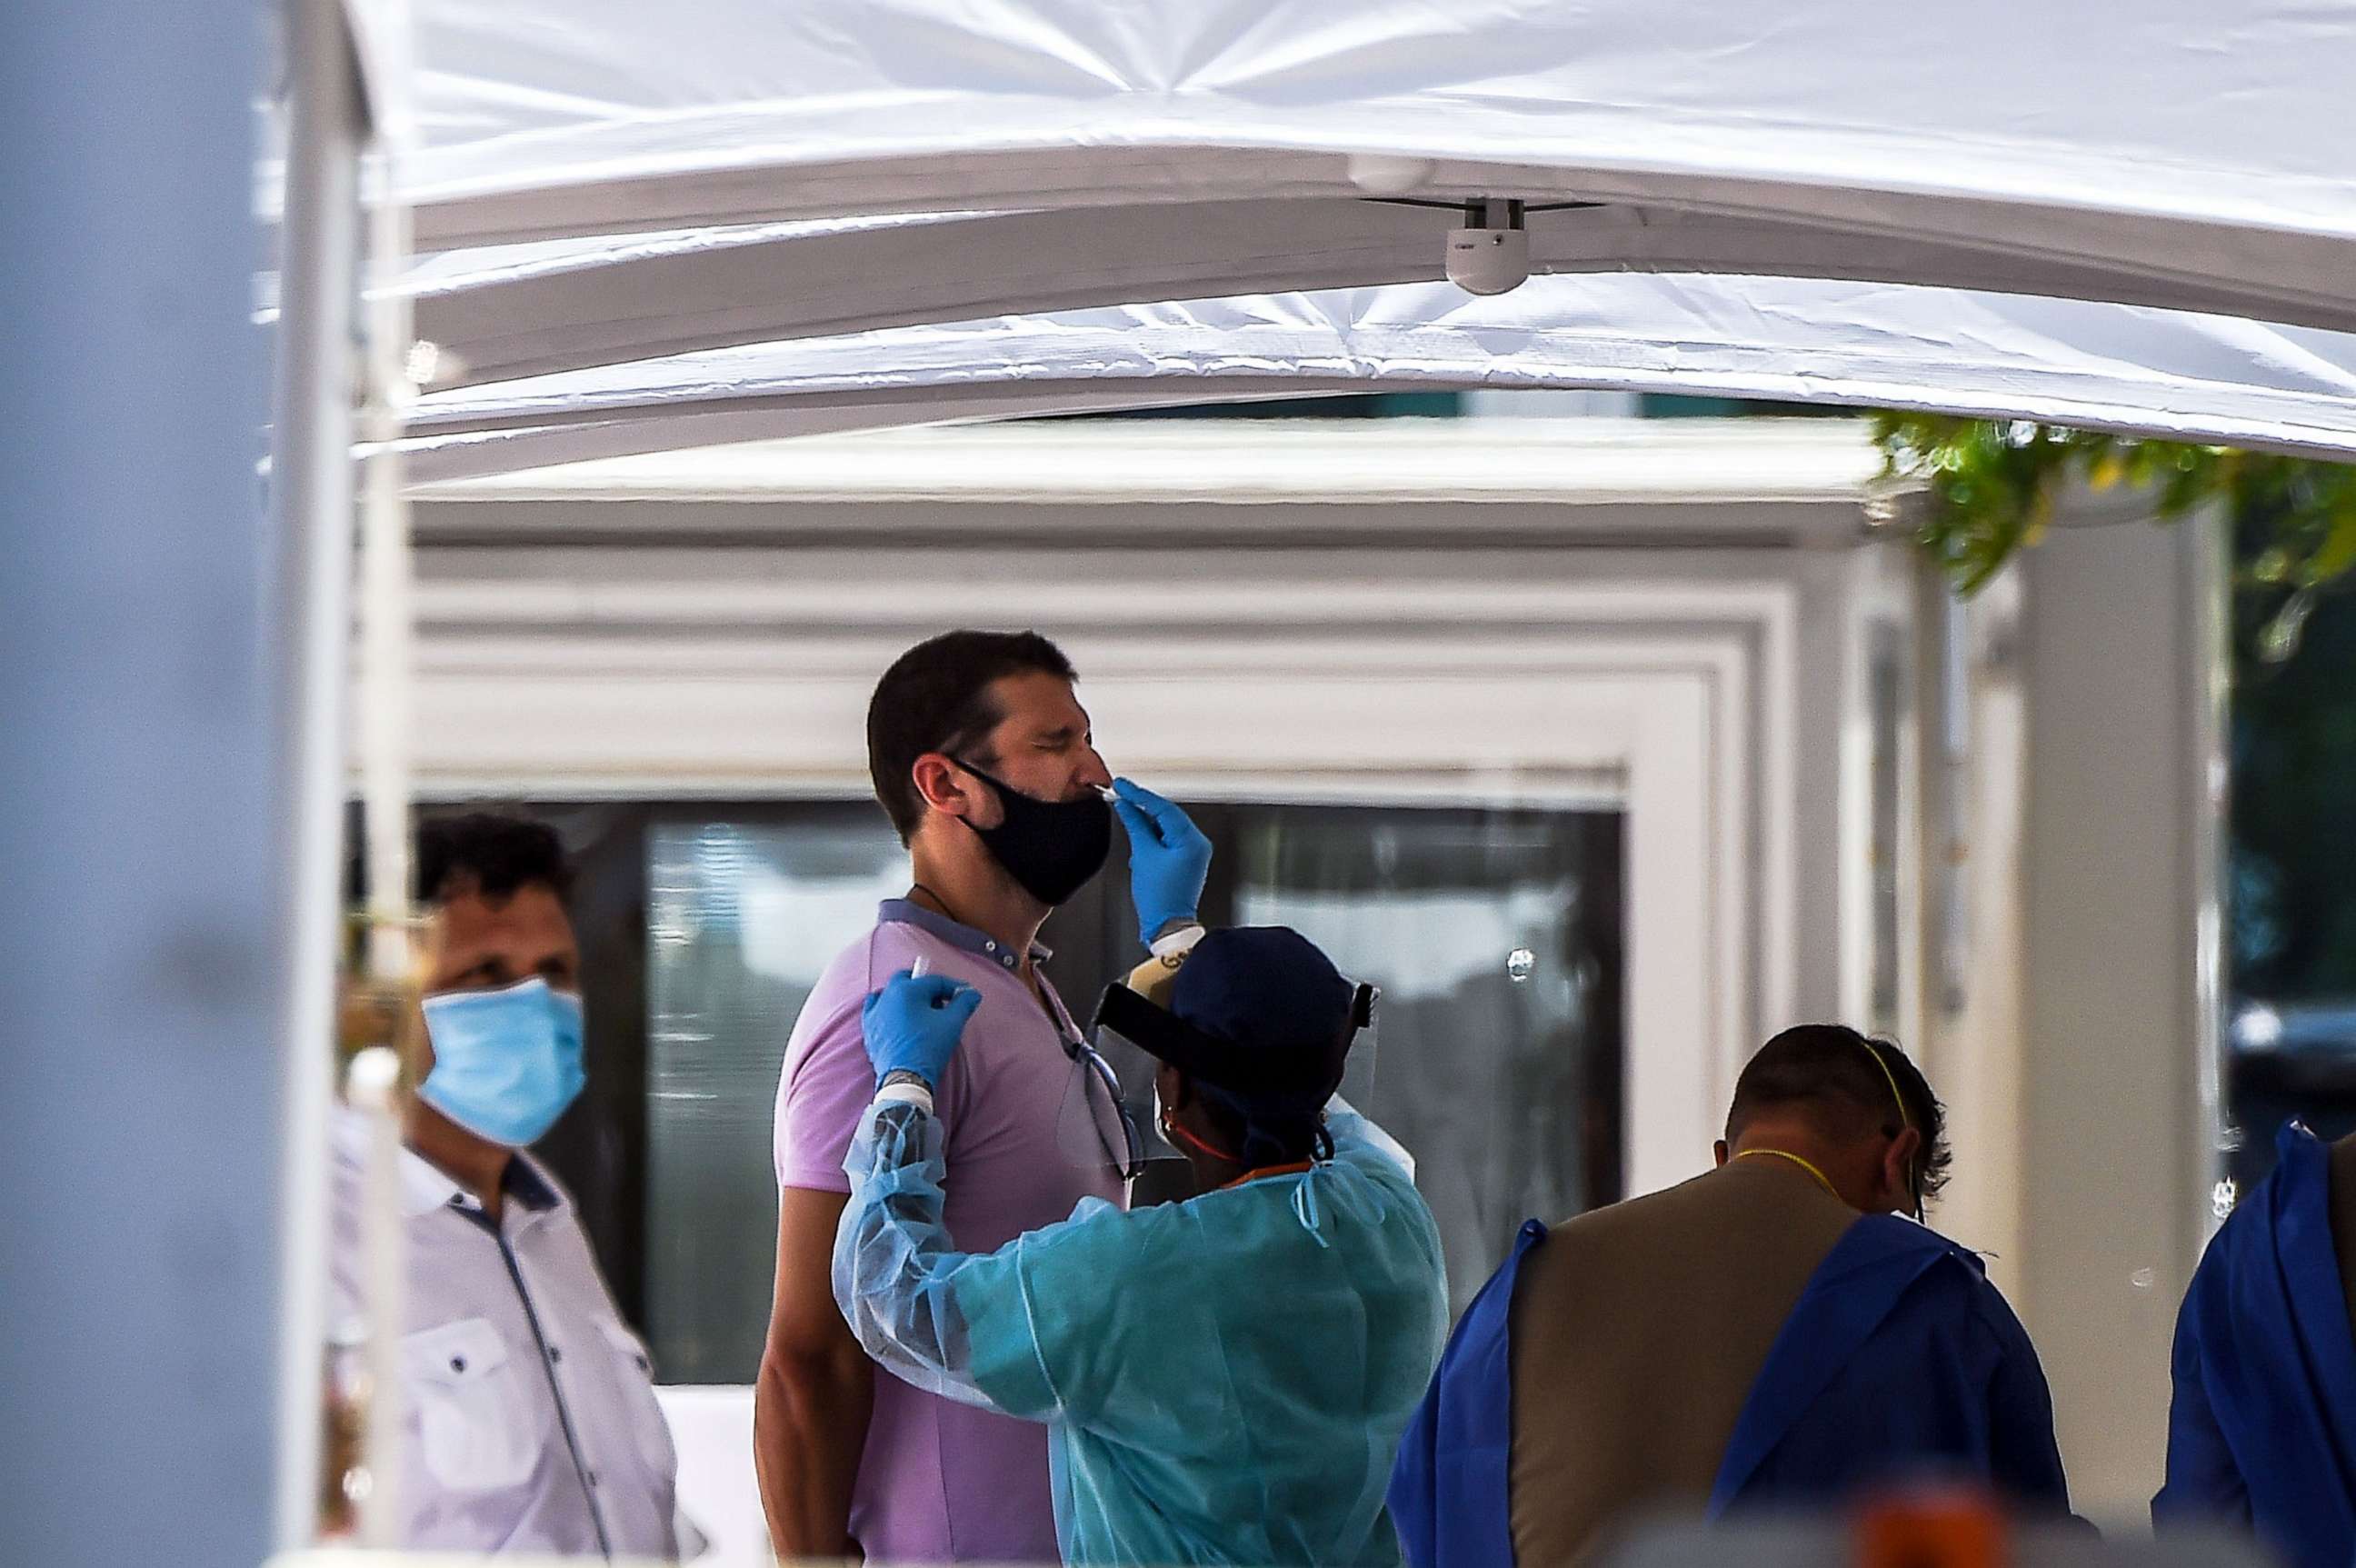 PHOTO: In this June 24, 2020, file photo, a medical personnel member takes samples on a man at a Covid-19 testing site in Miami Beach, Fla.